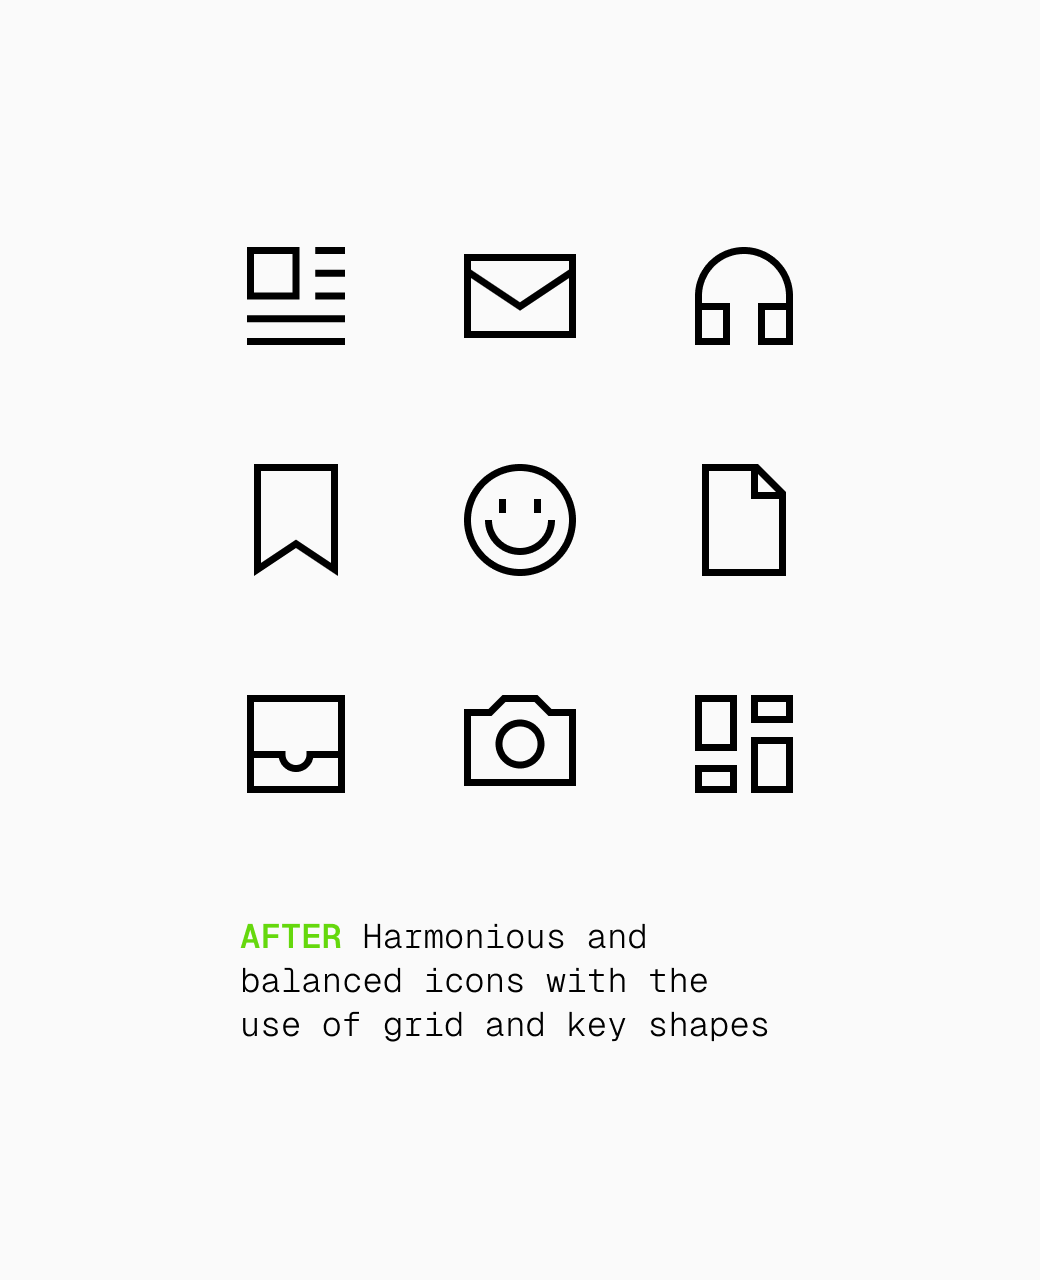 Create consistent, harmonious icons with Grids and Key Shapes